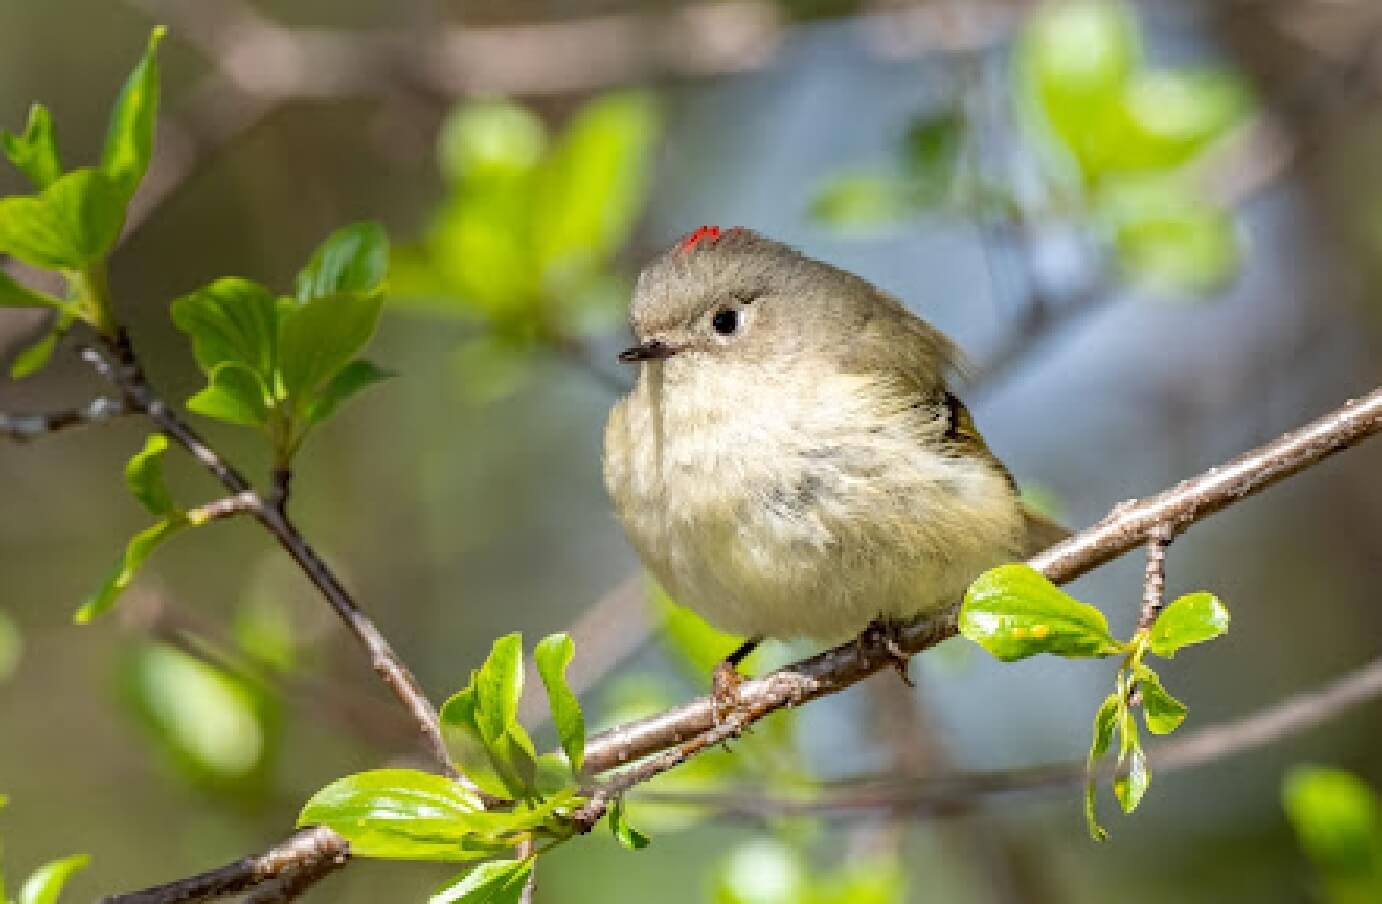 a Ruby-Crowned Kinglet perched on a branch, looking towards the direction of the camera